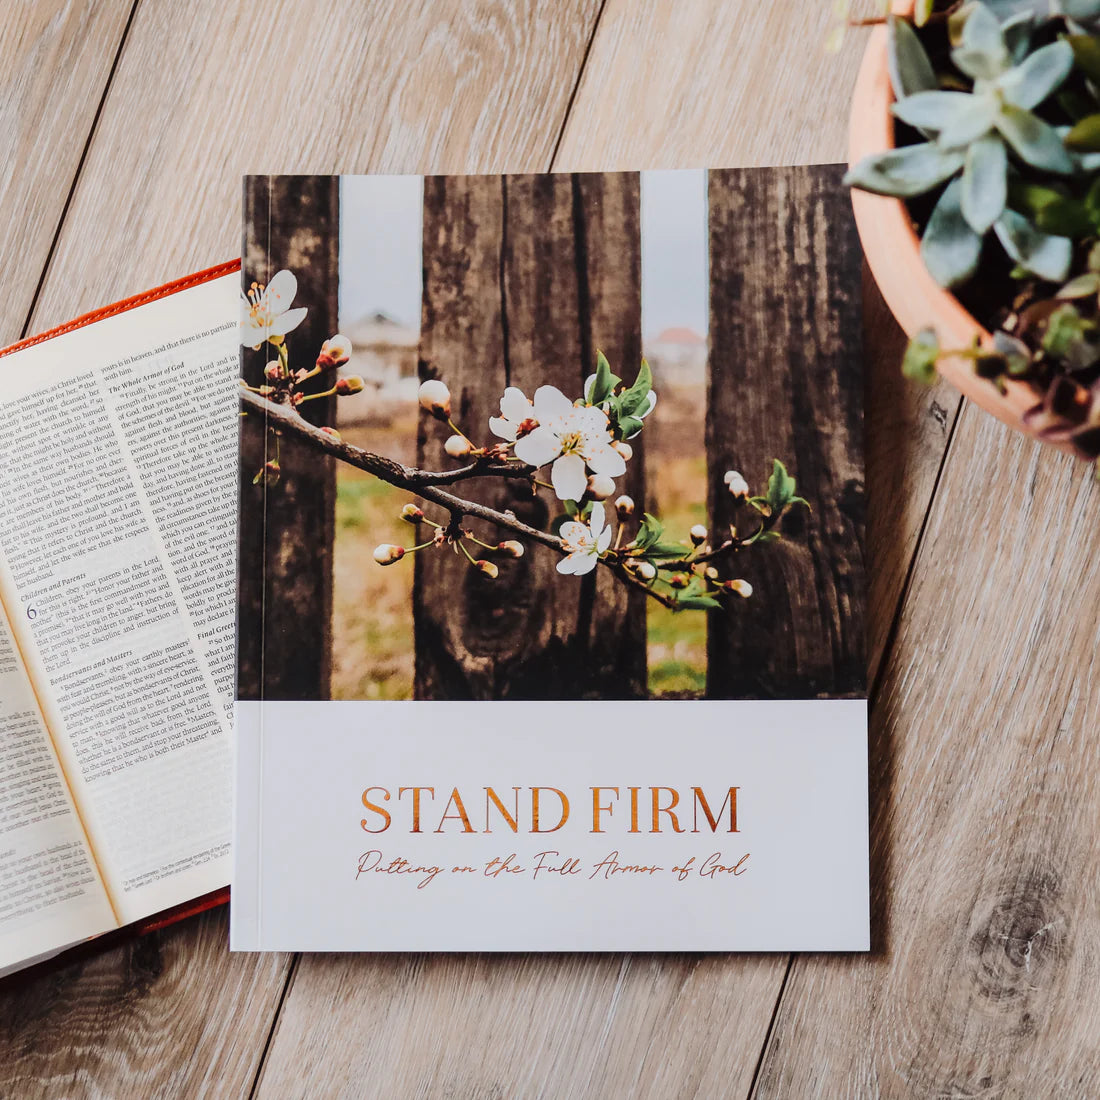 Stand Firm Armor of God Study Guide (K745)